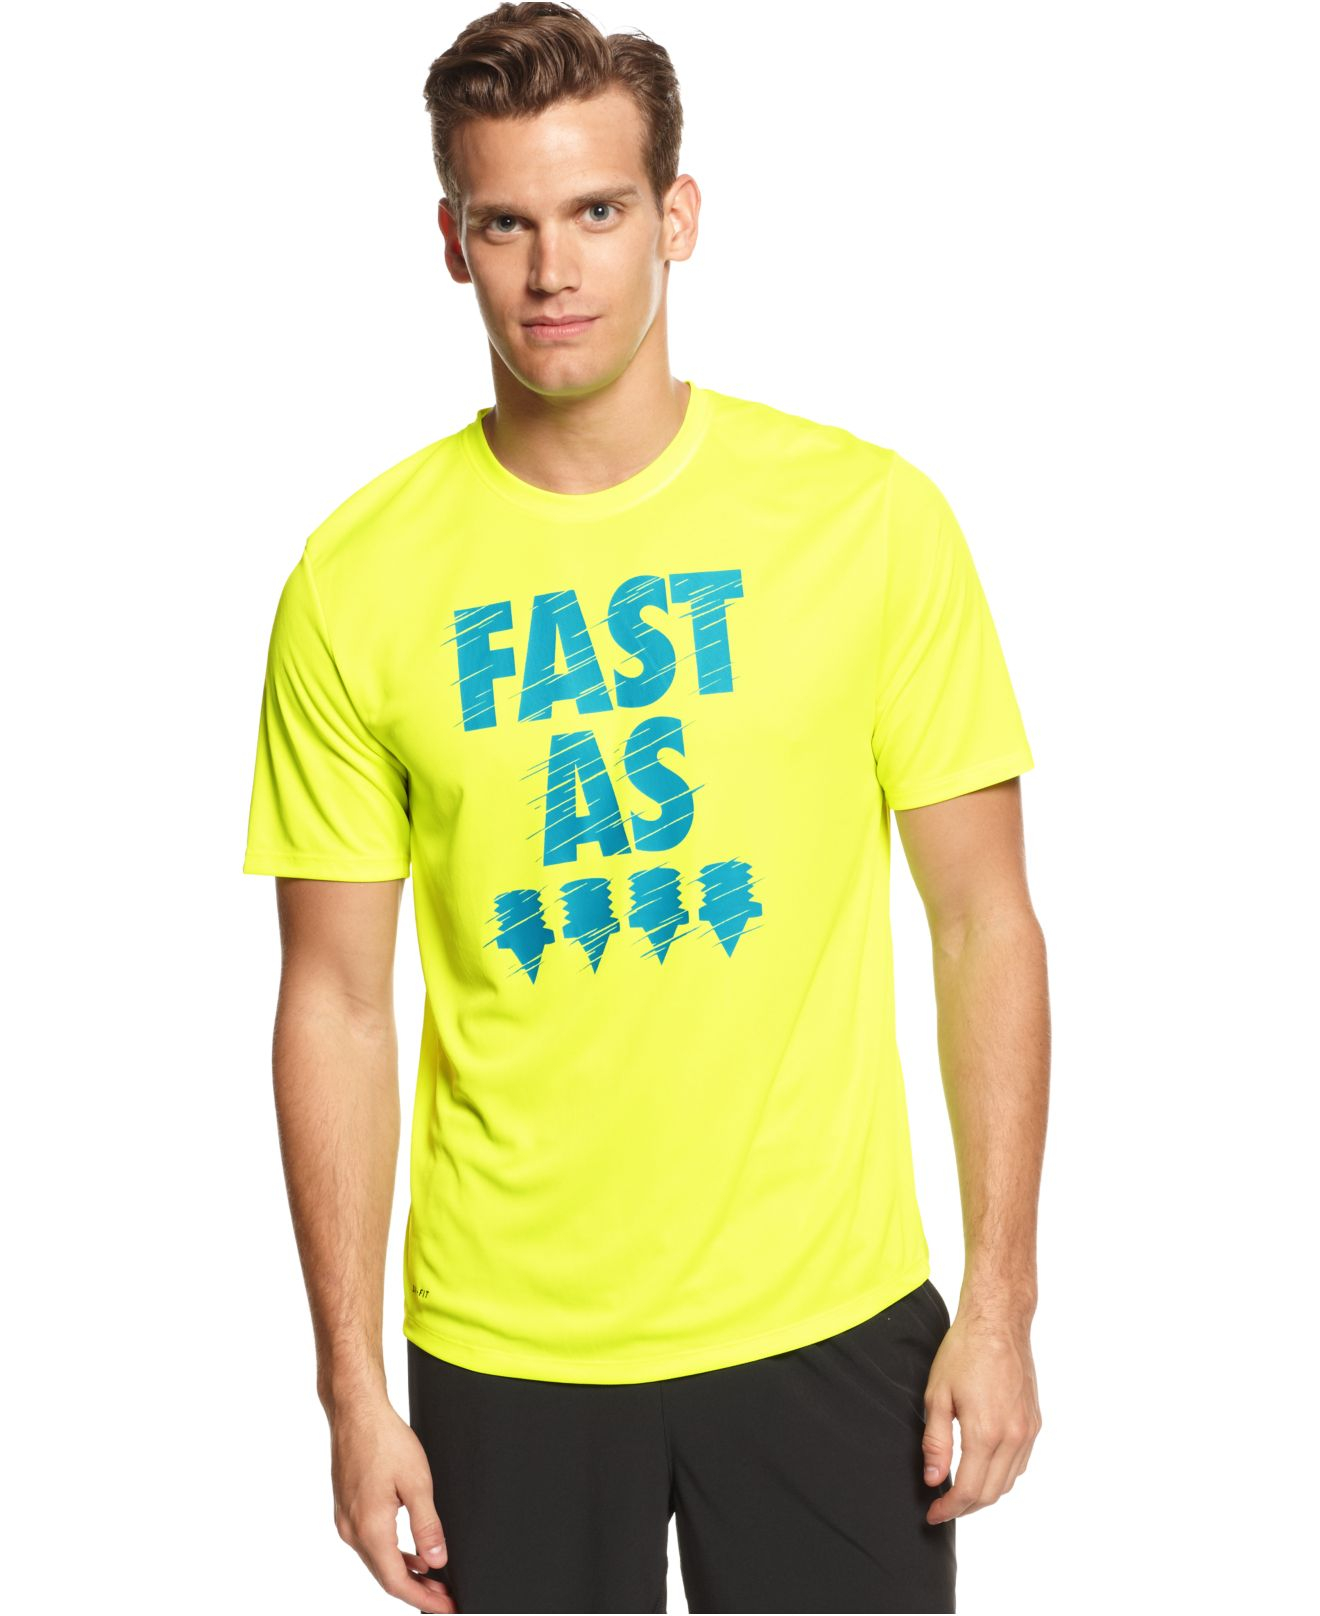 Lyst - Nike Fast As Tshirt in Yellow for Men